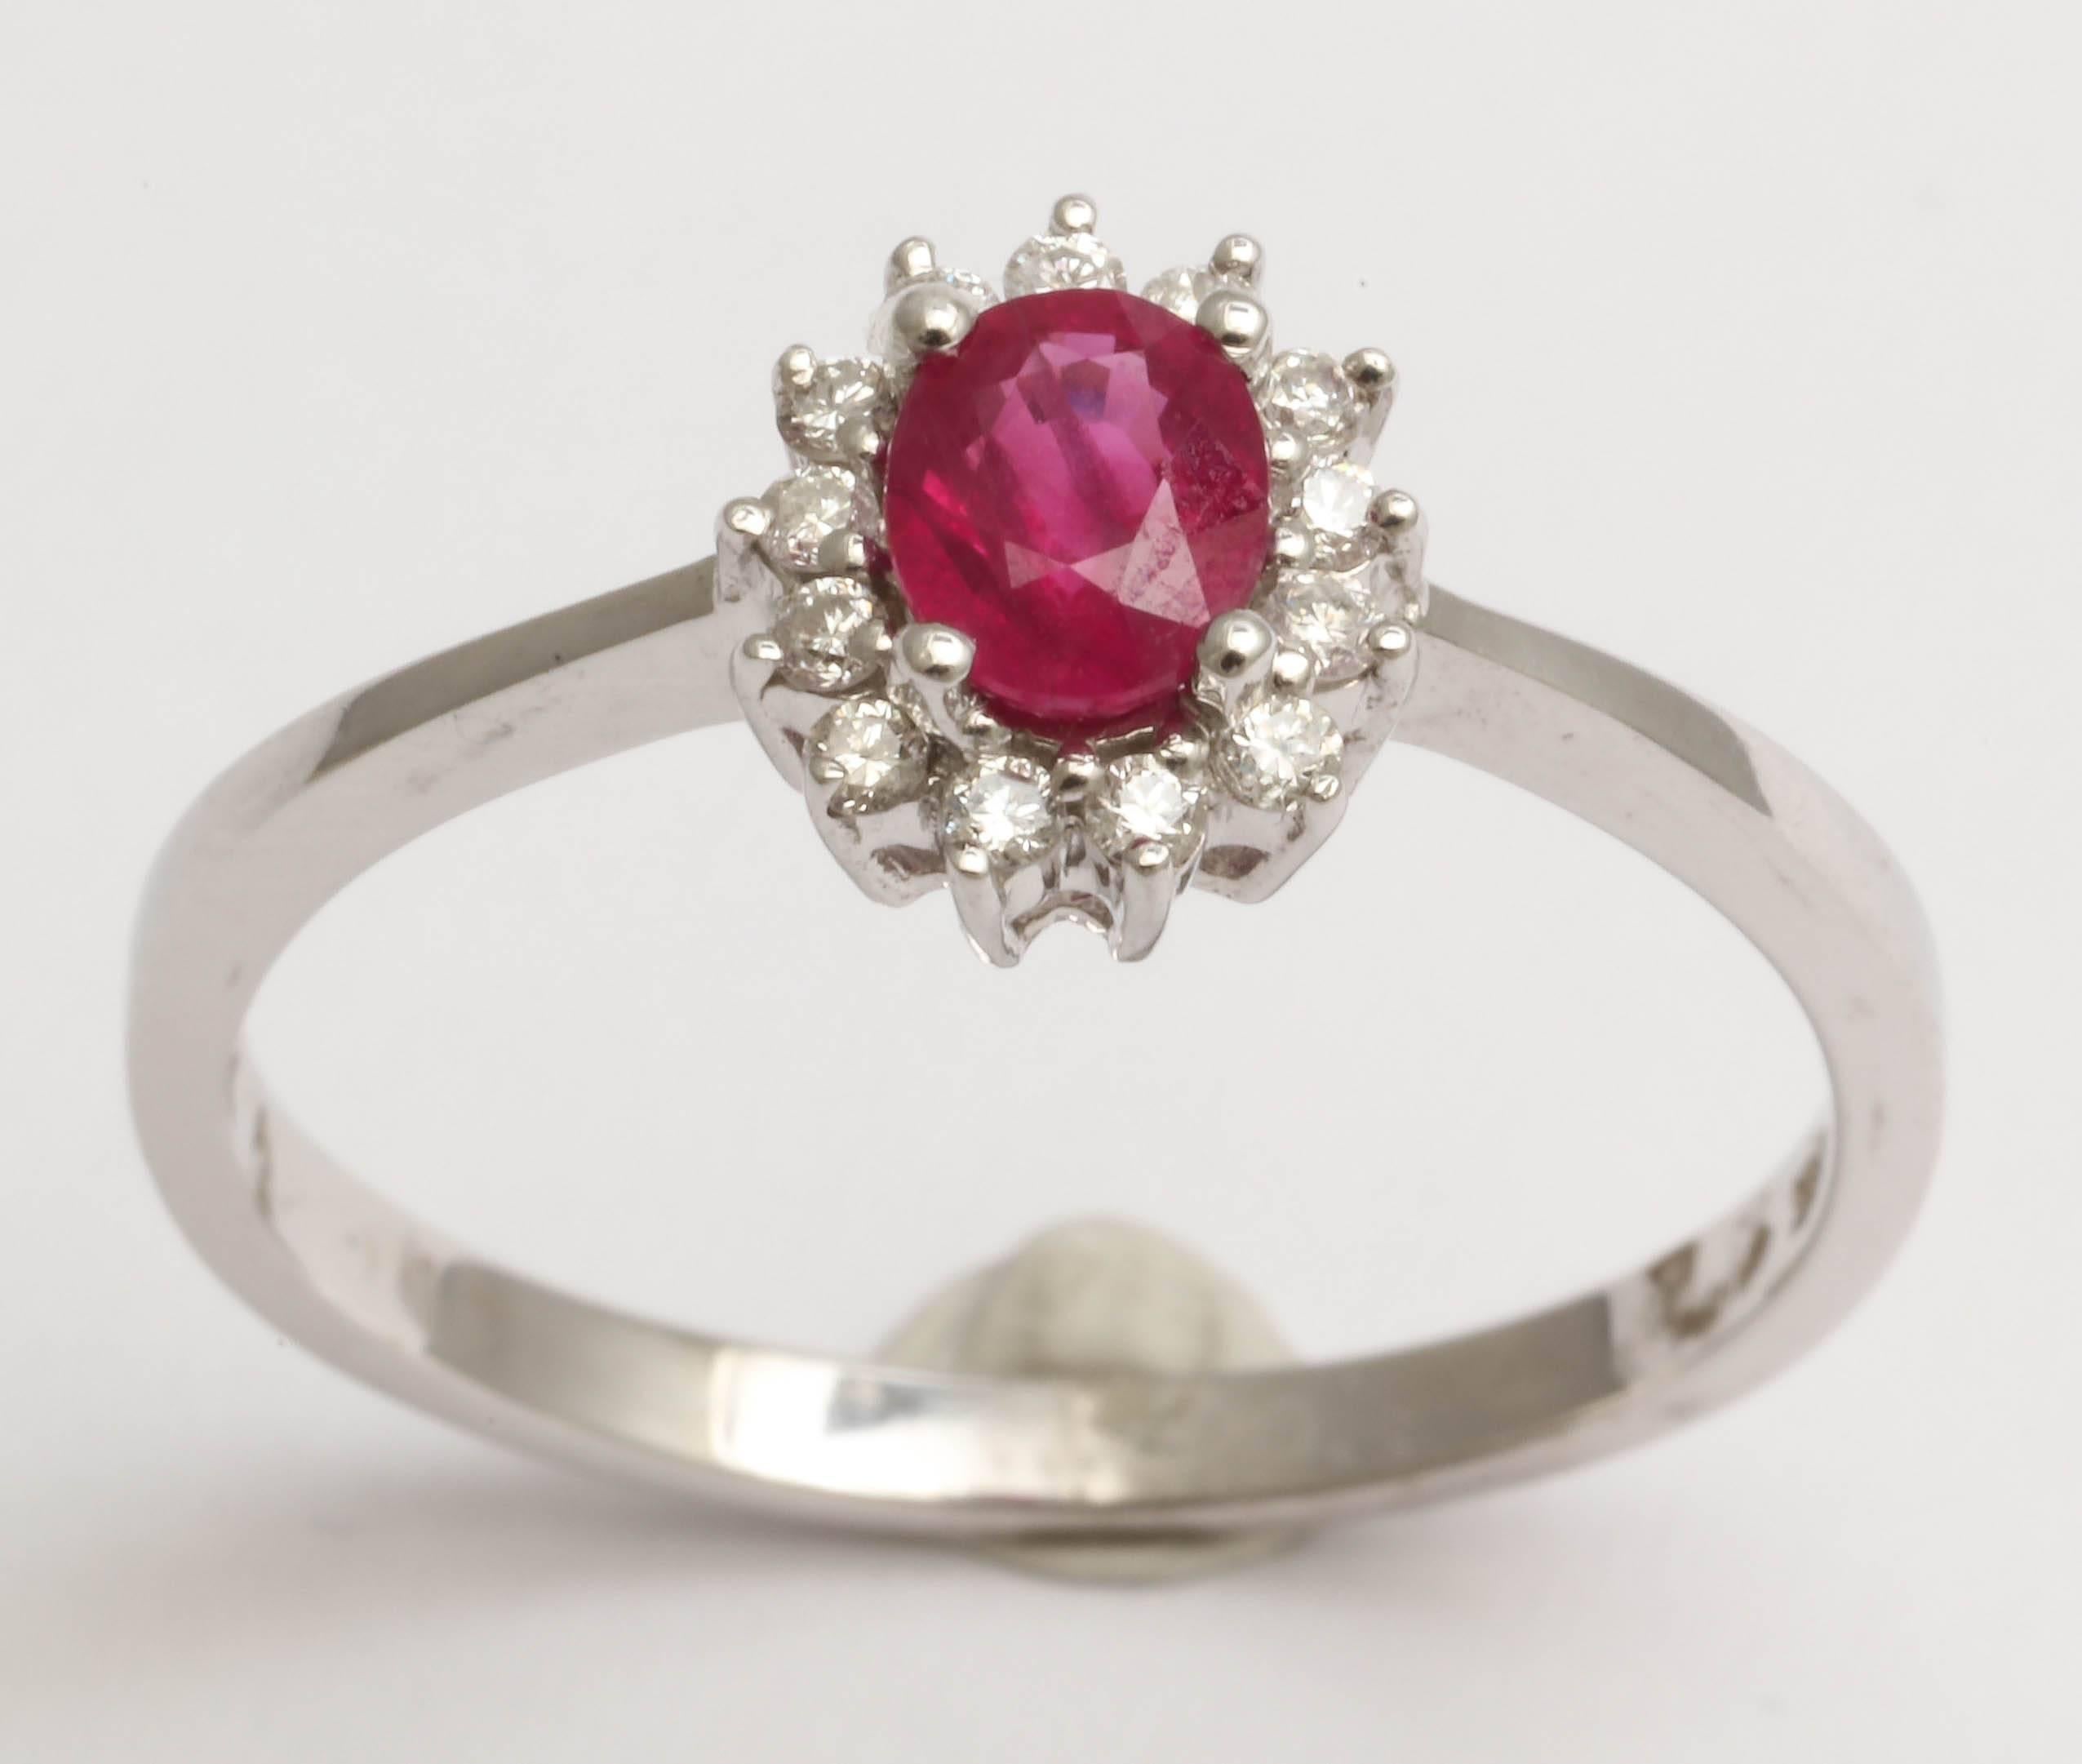 This charming ring is made in 14 kt white gold. The central ruby is .72ct and the diamonds .25cts. The ring is a size 7.5 now and can be sized. This ring matches earrings J6961611232175953fs and pendant J6961611232176003fs.